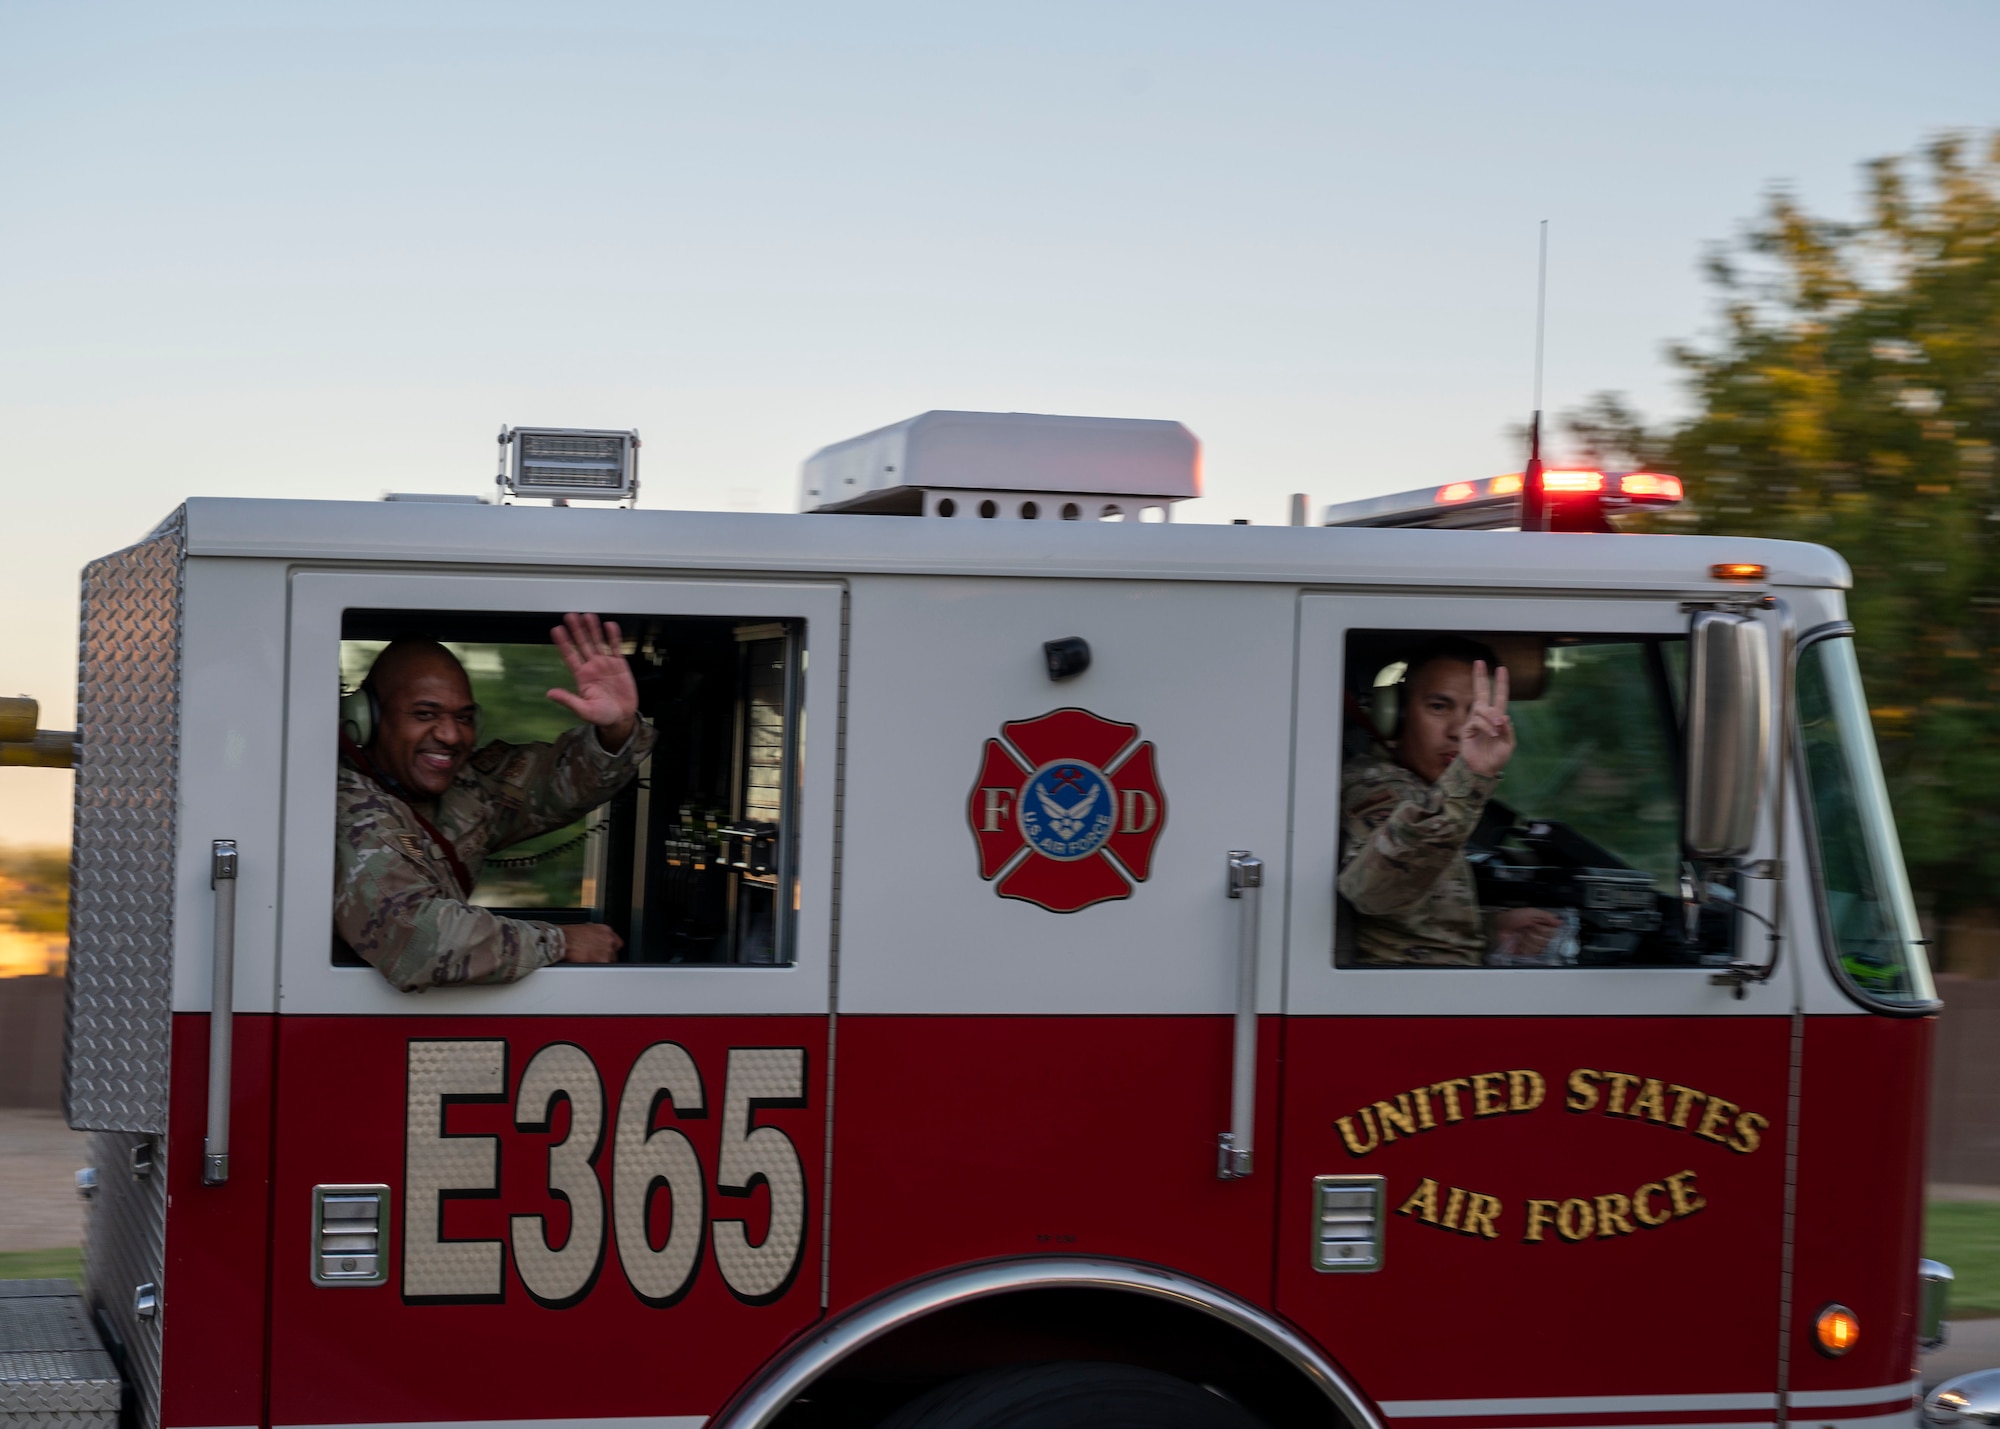 U.S. Air Force Airmen assigned to the 56th Civil Engineer Squadron Fire Department wave as they pass through base housing Oct. 13, 2022, at Luke Air Force Base, Arizona.